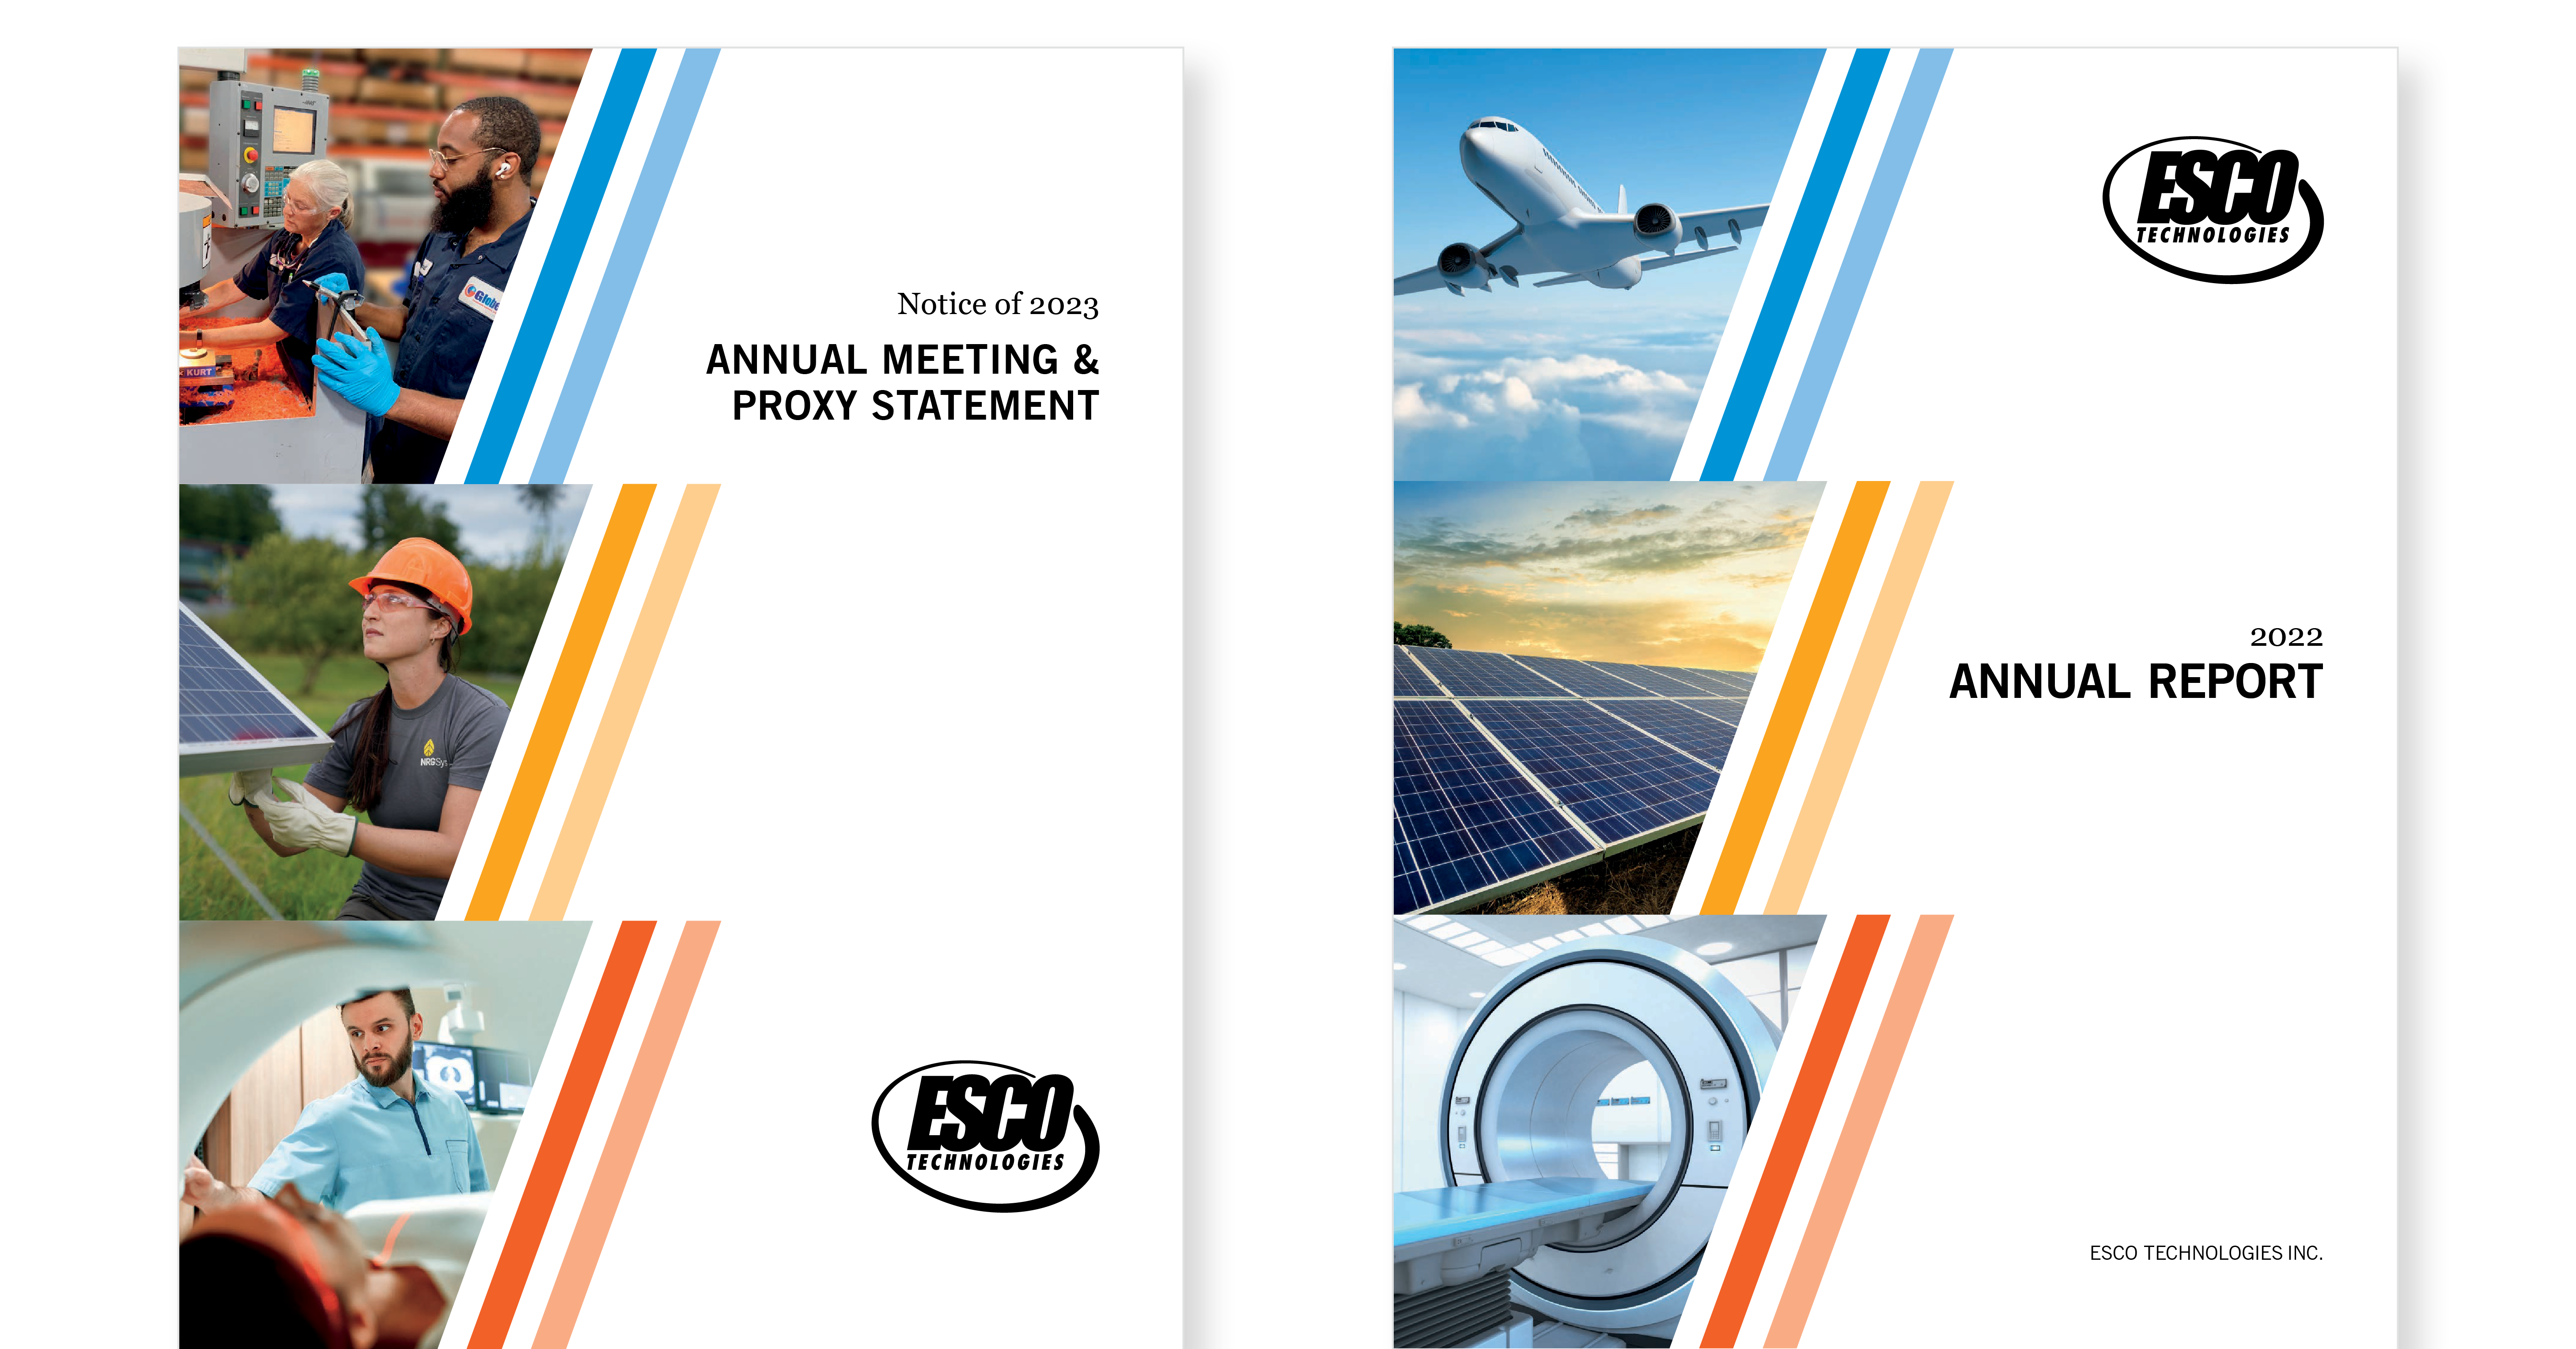 esco technologies 2023 proxy statement and 2022 annual report examples